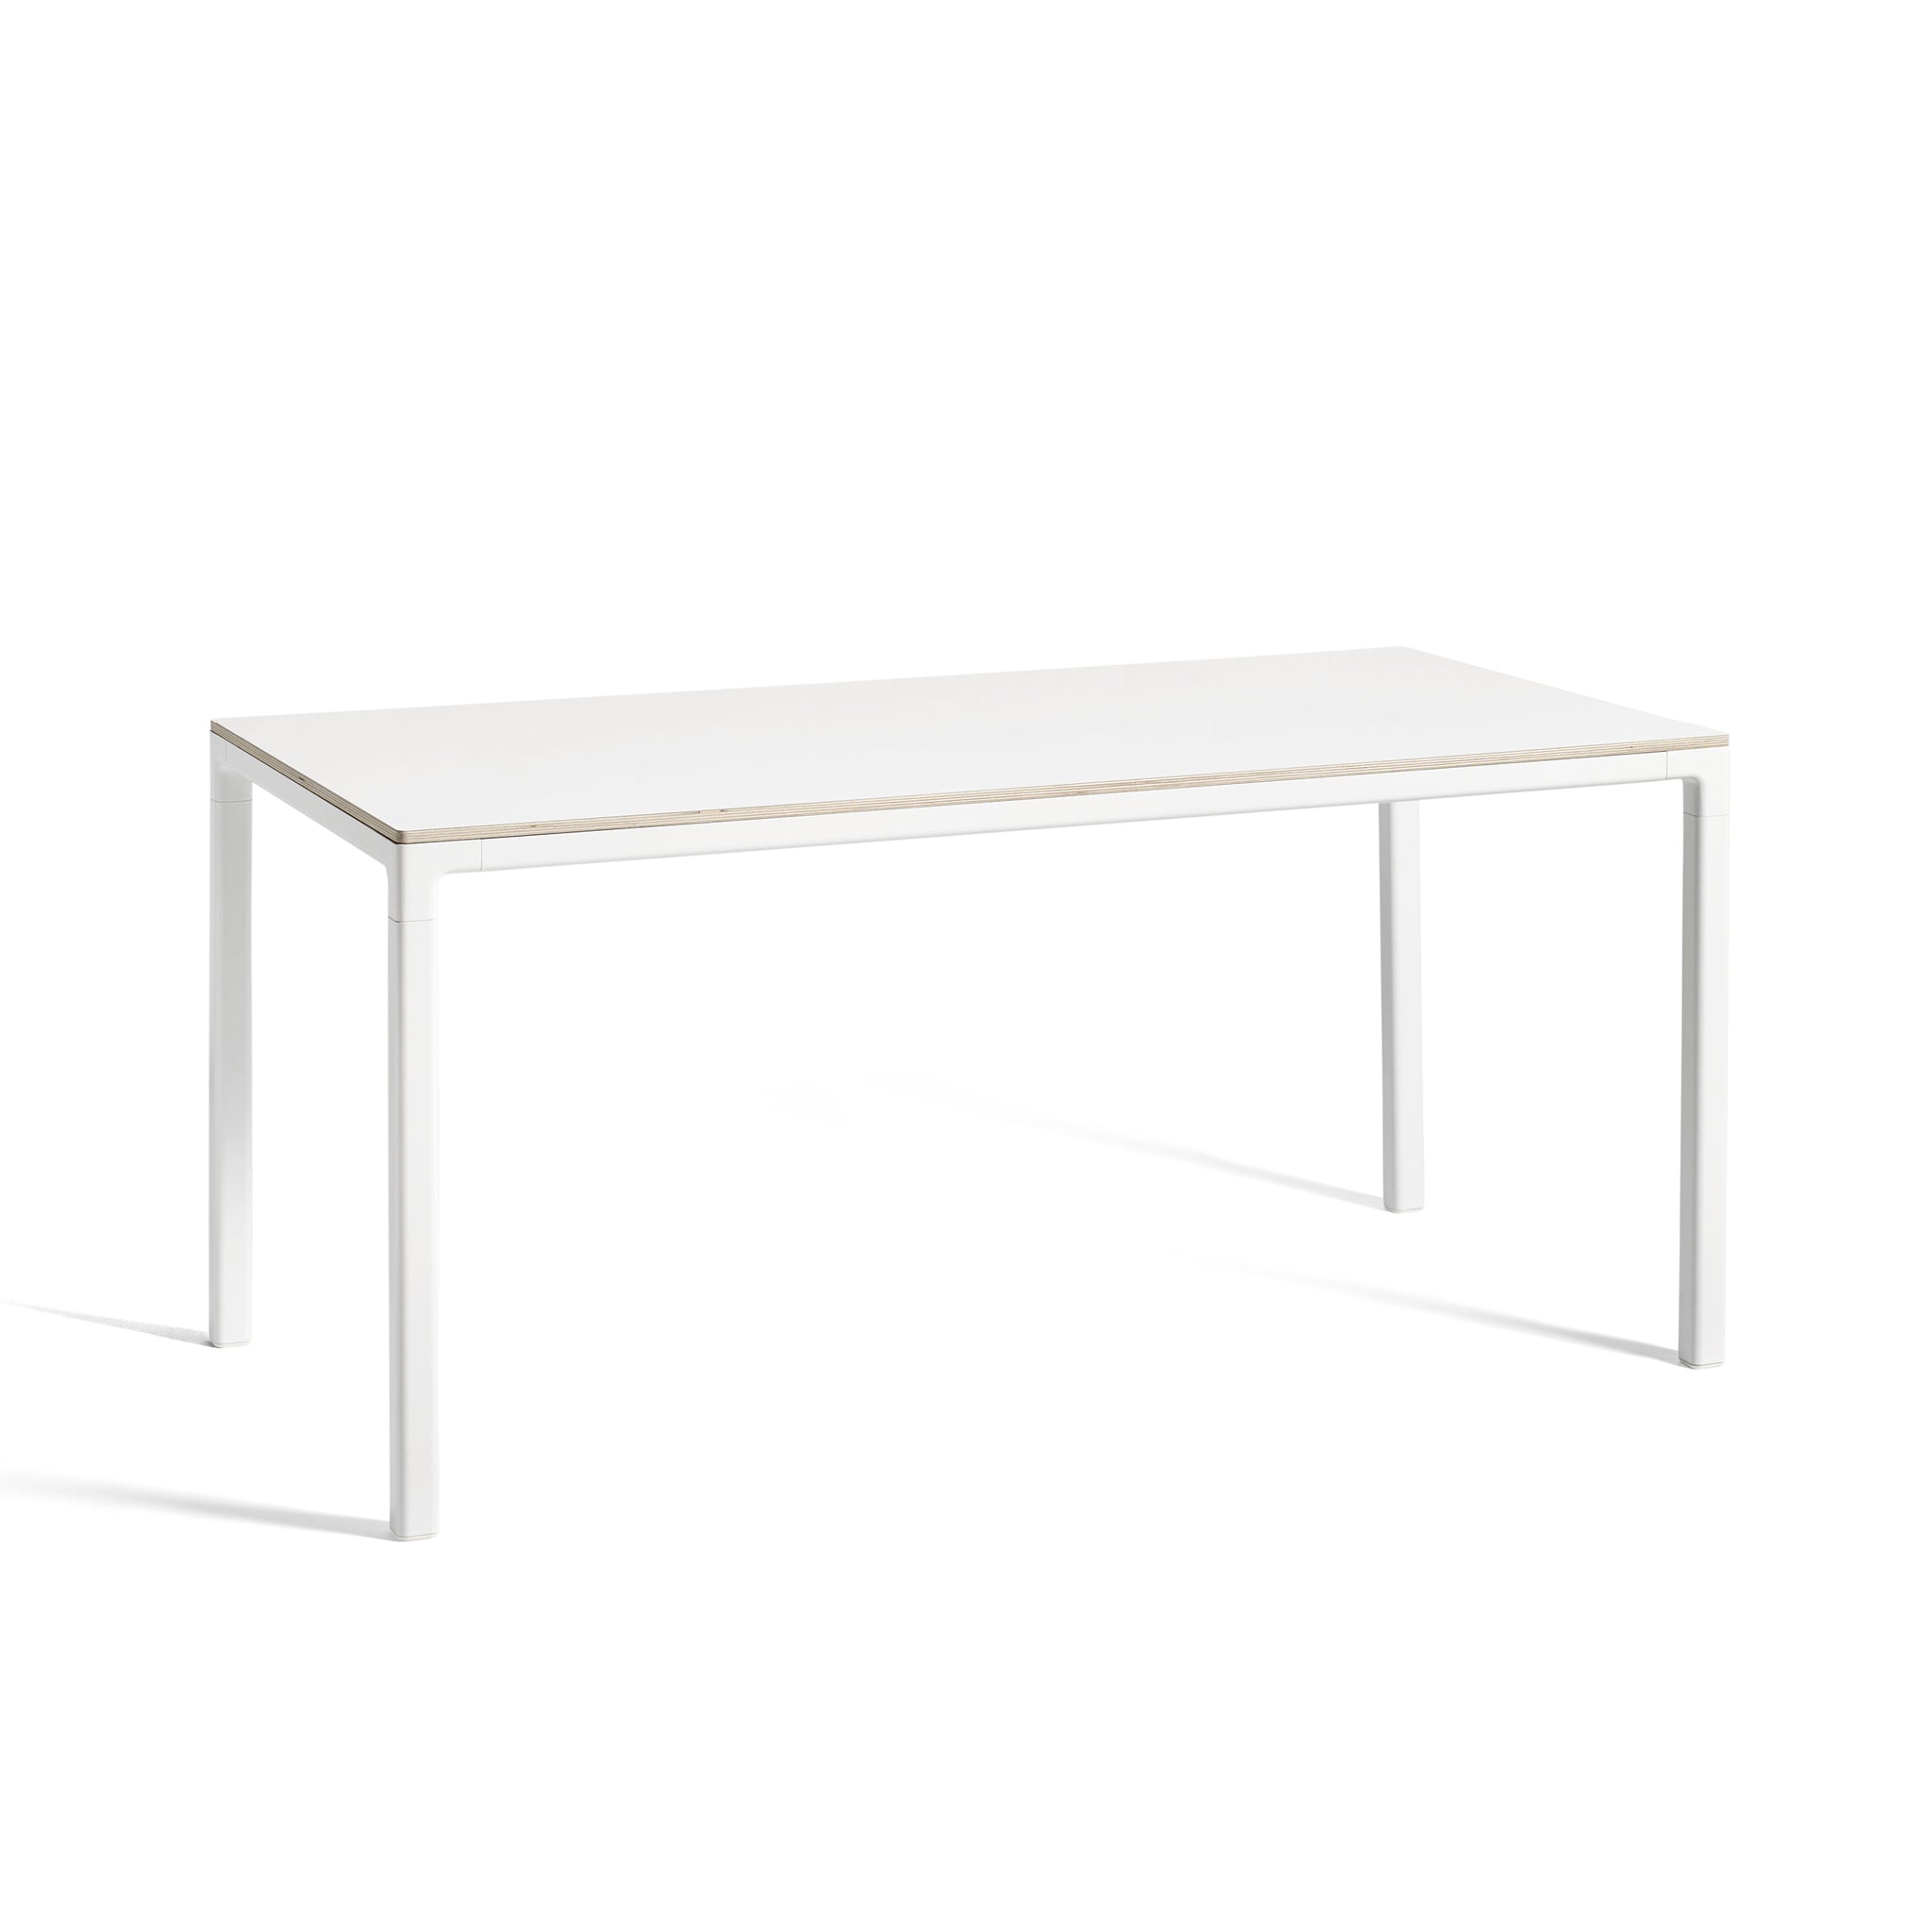 T12 Table by Hay